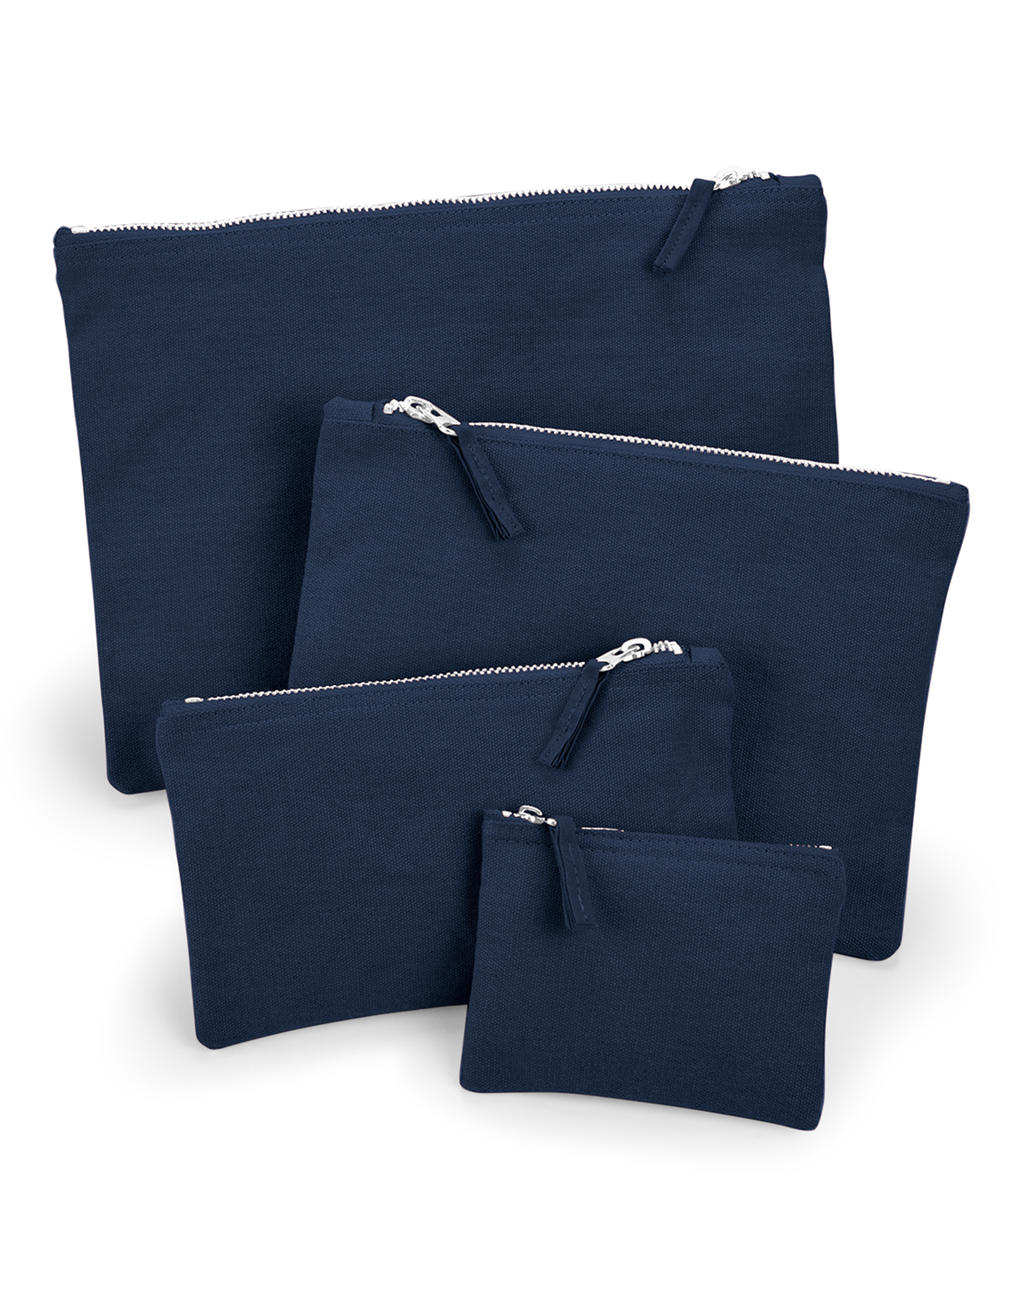  Canvas Accessory Pouch in Farbe Navy